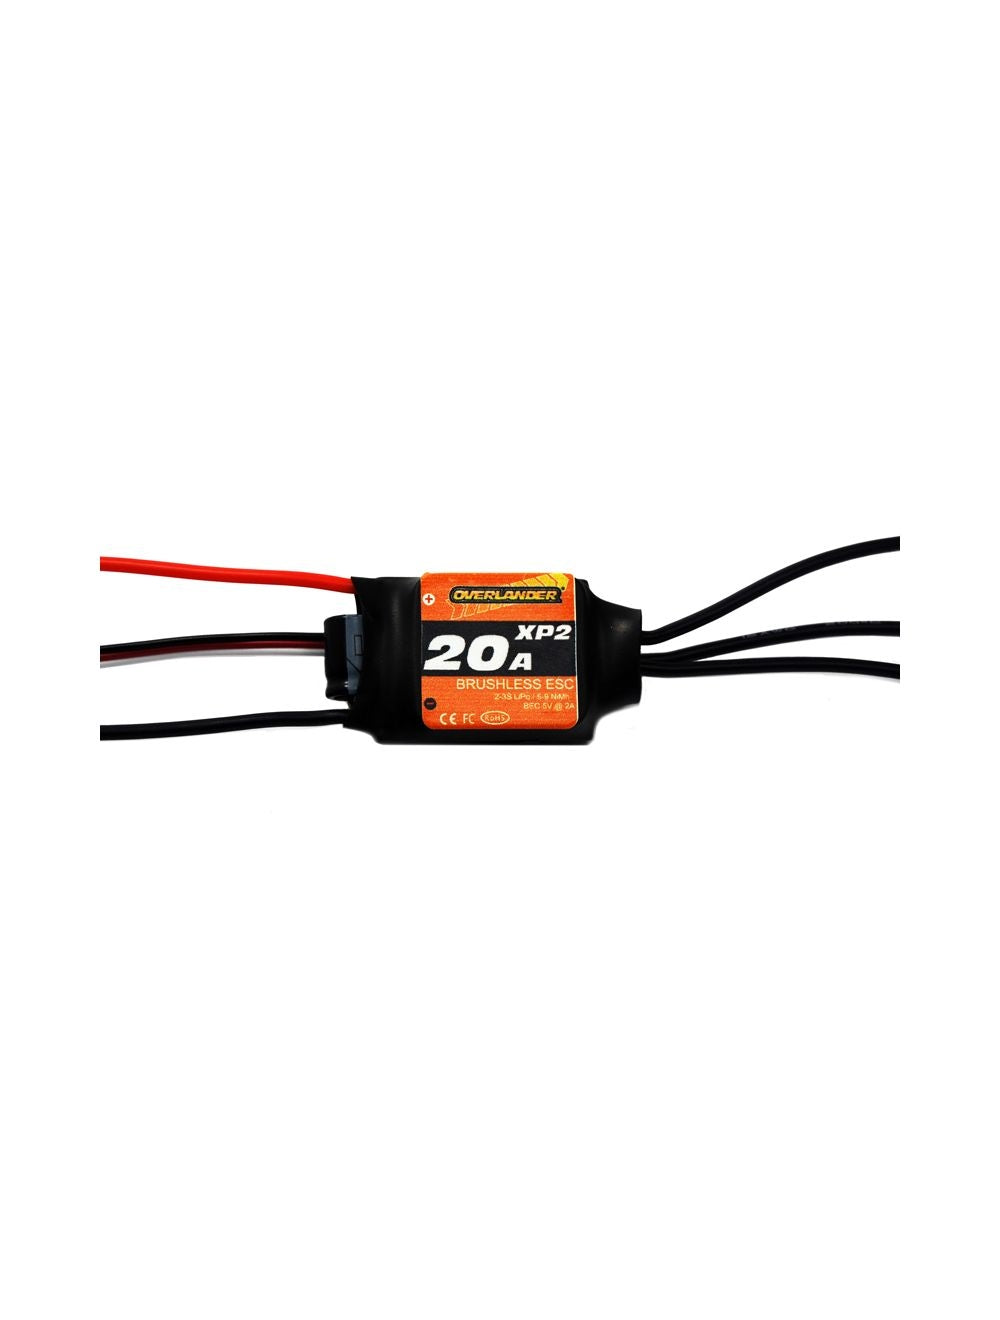 Overlander XP2 20A Brushless Speed Controller 2609